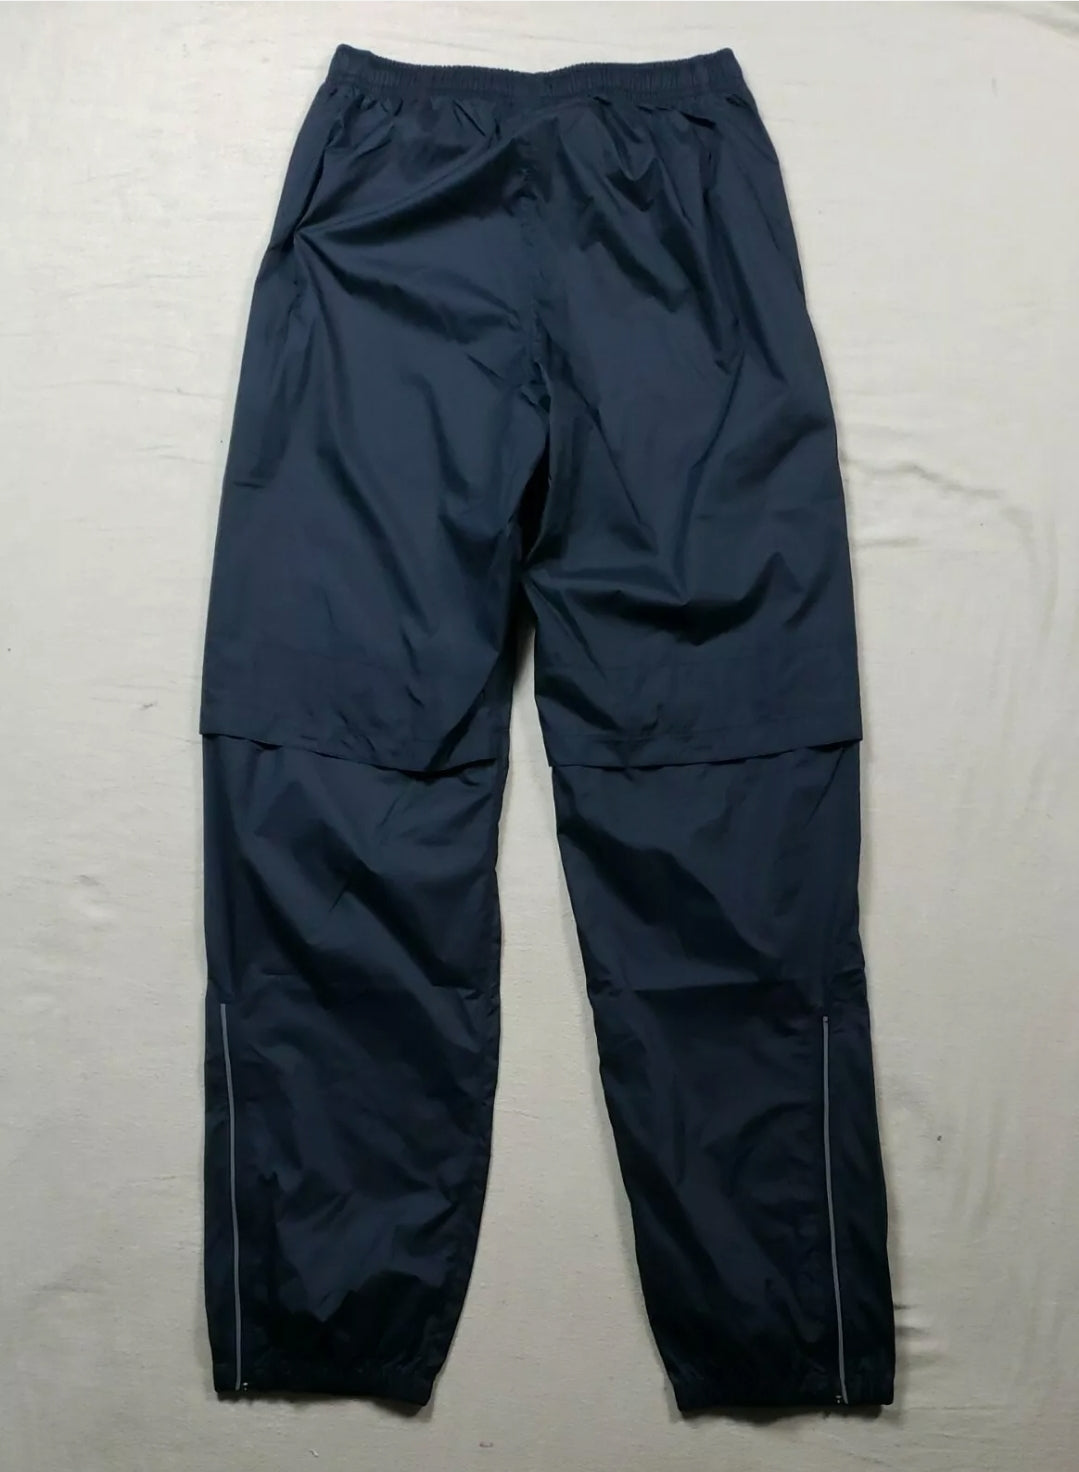 Nike Pro Elite Wind Pants size Small Track and Field Rare Navy